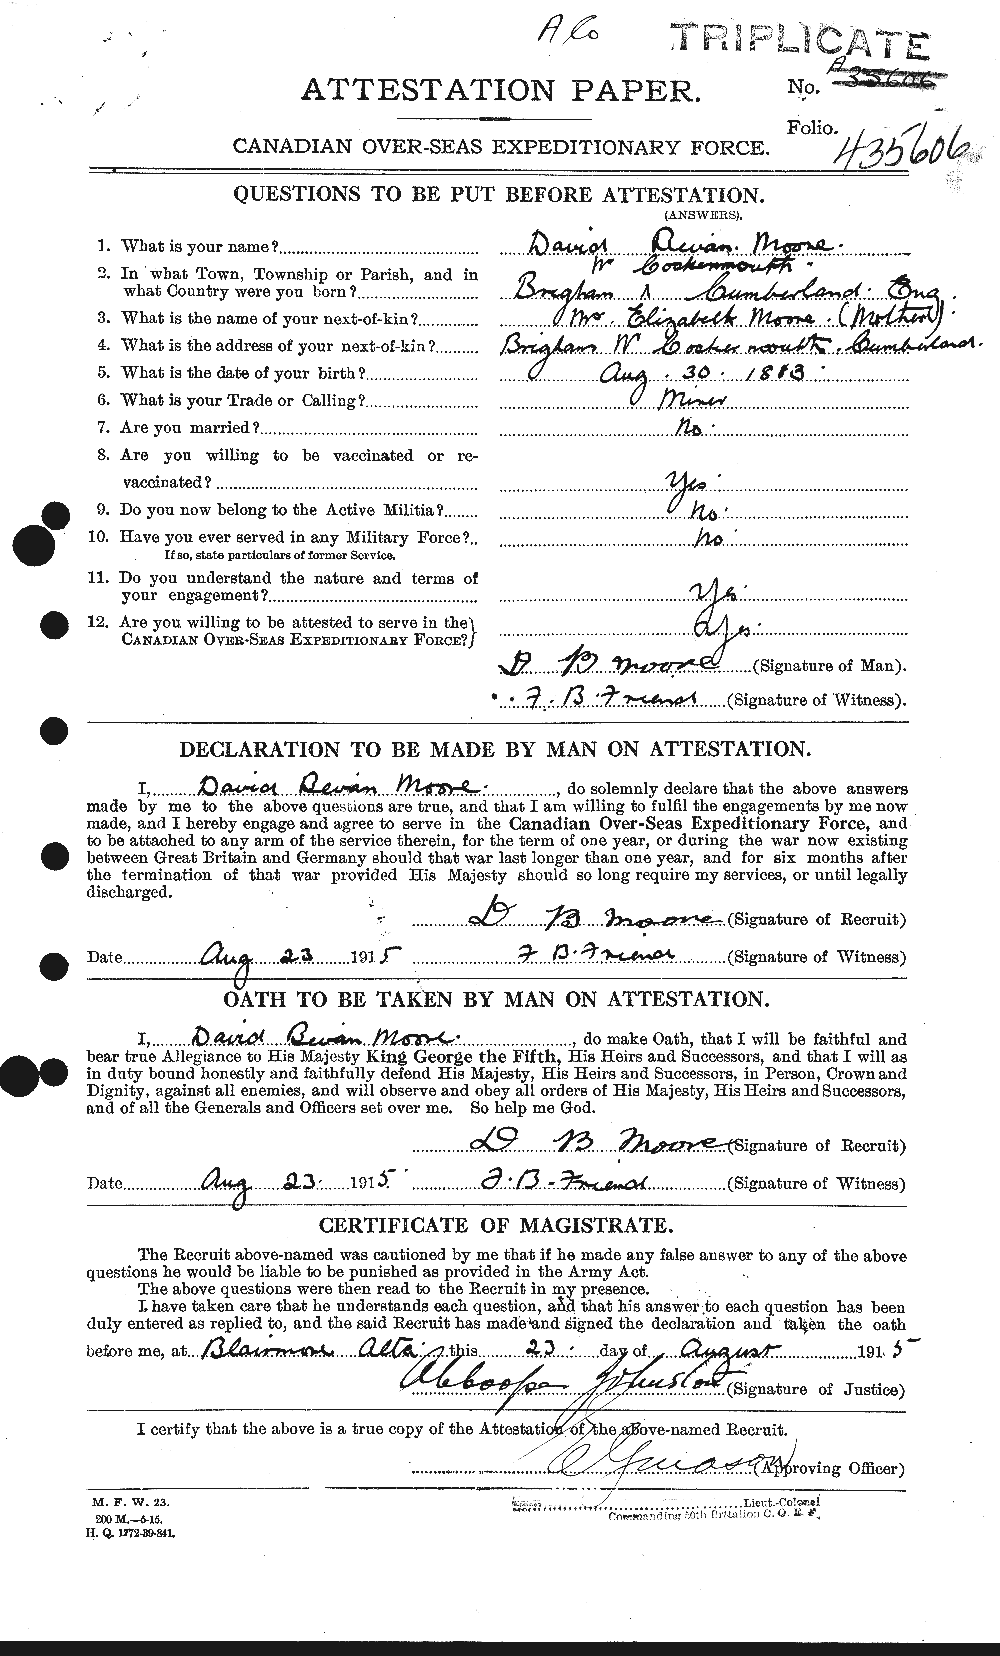 Personnel Records of the First World War - CEF 506570a